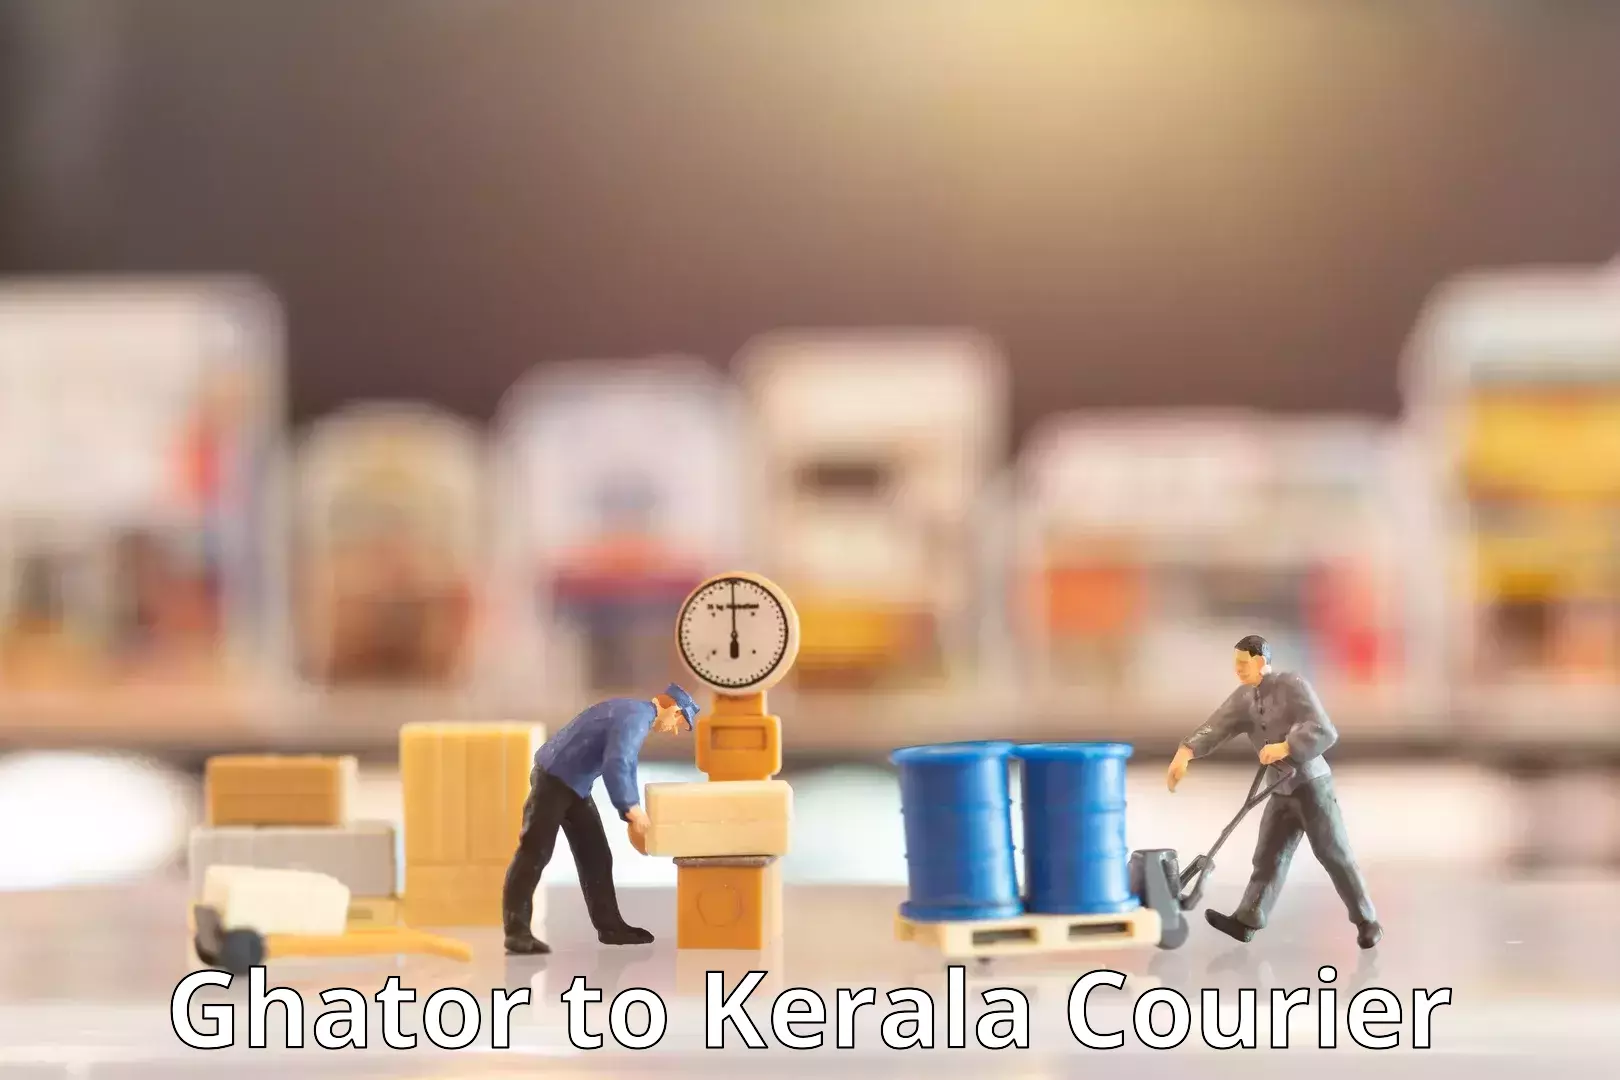 Package delivery network Ghator to Kerala